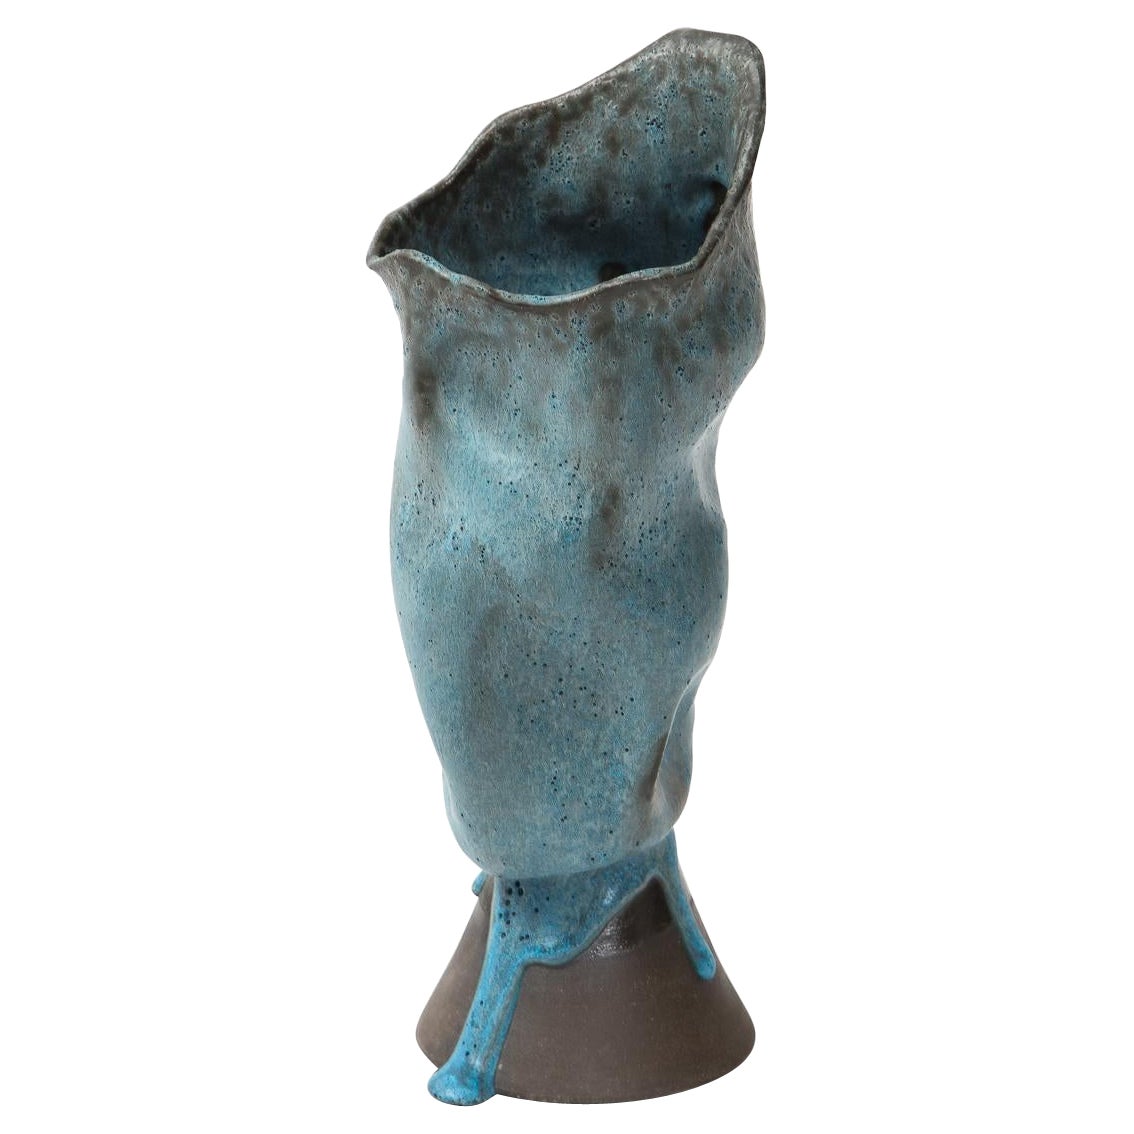 Vase with Cone Foot by David Haskell